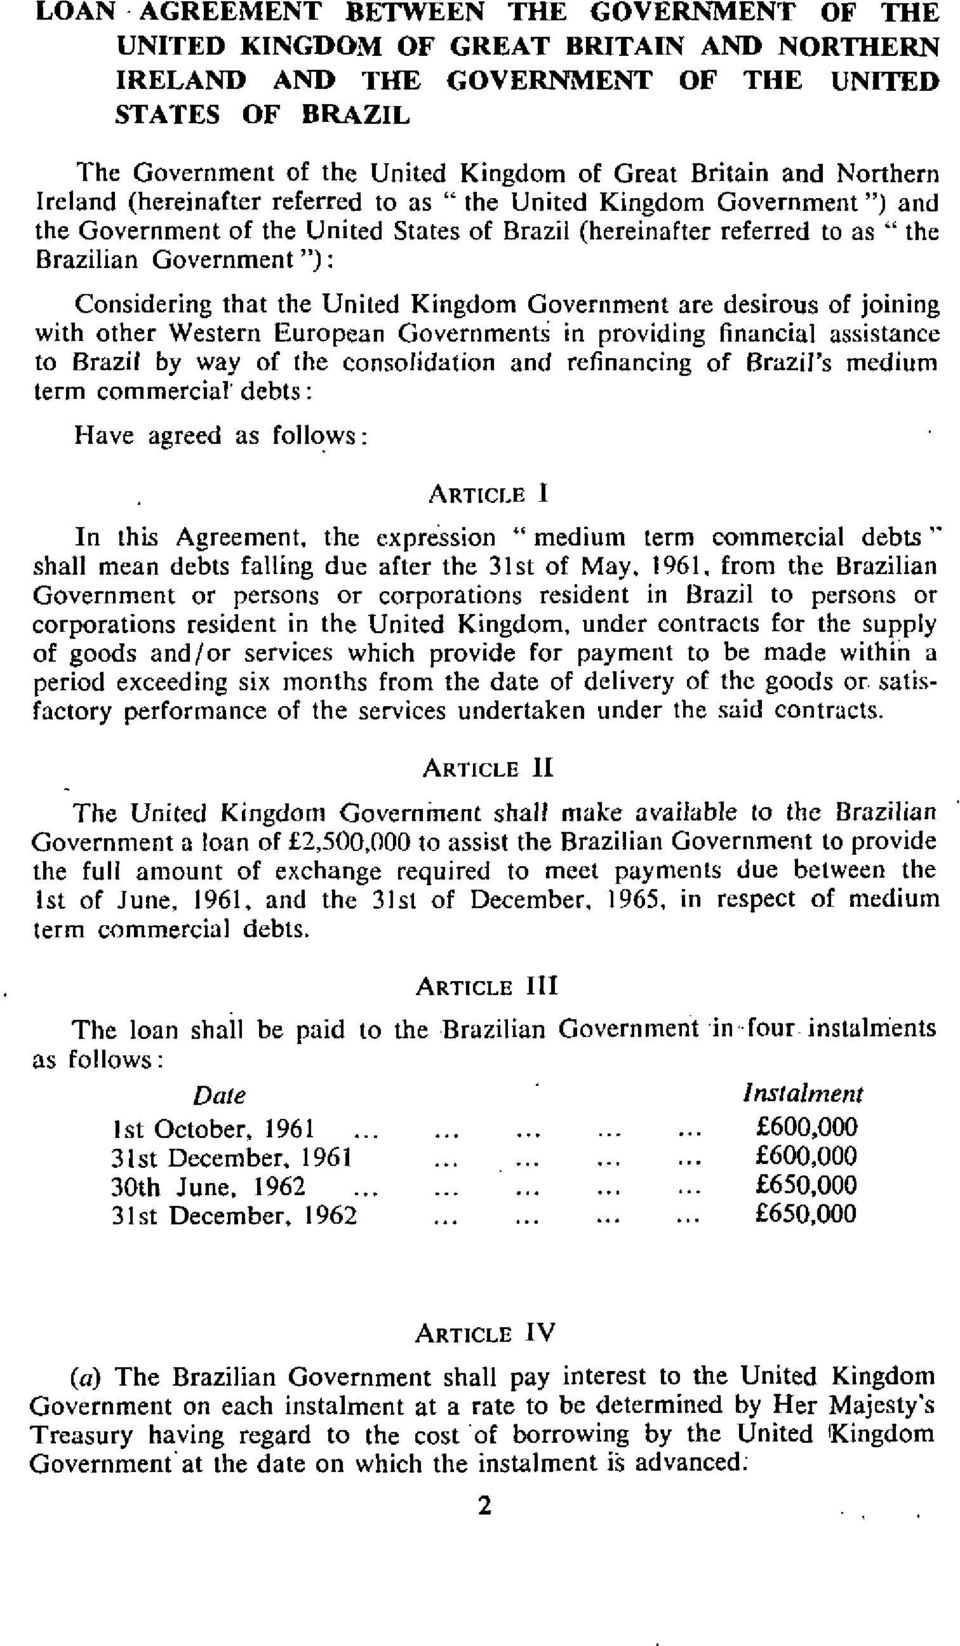 Considering that the United Kingdom Government are desirous of joining with other Western European Governments in providing financial assistance to Brazil by way of the consolidation and refinancing